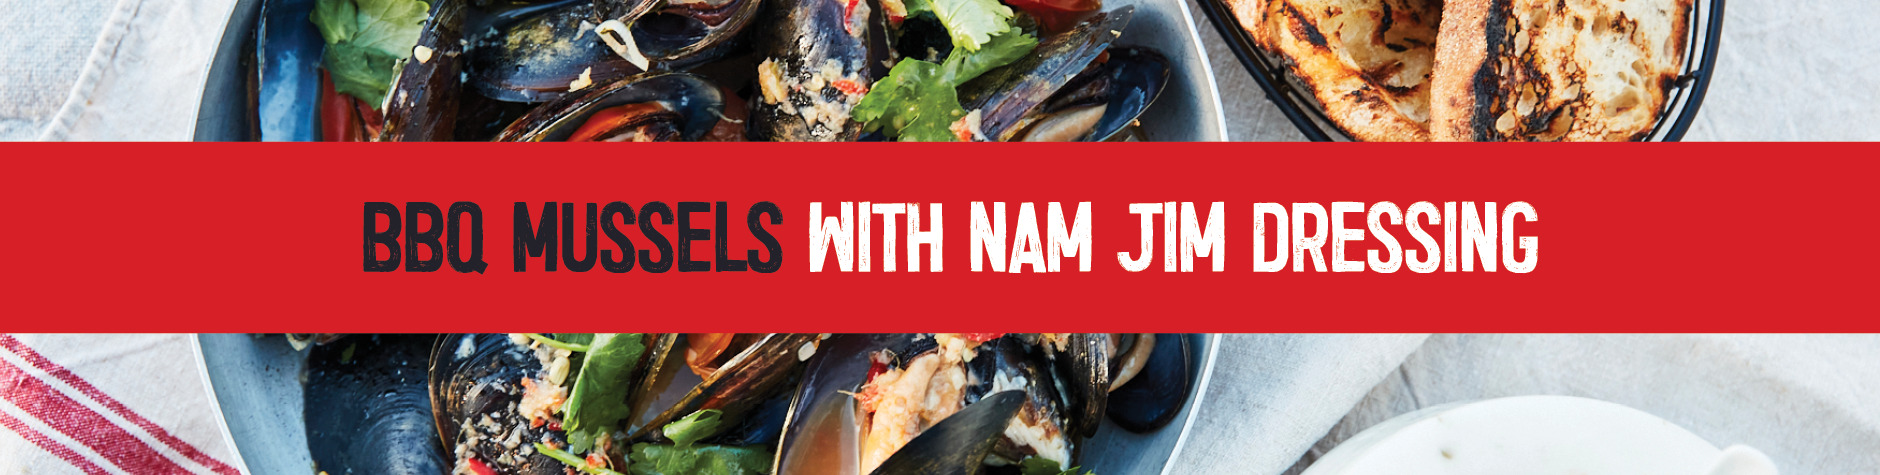 BBQ Mussels with Nam Jim Dressing